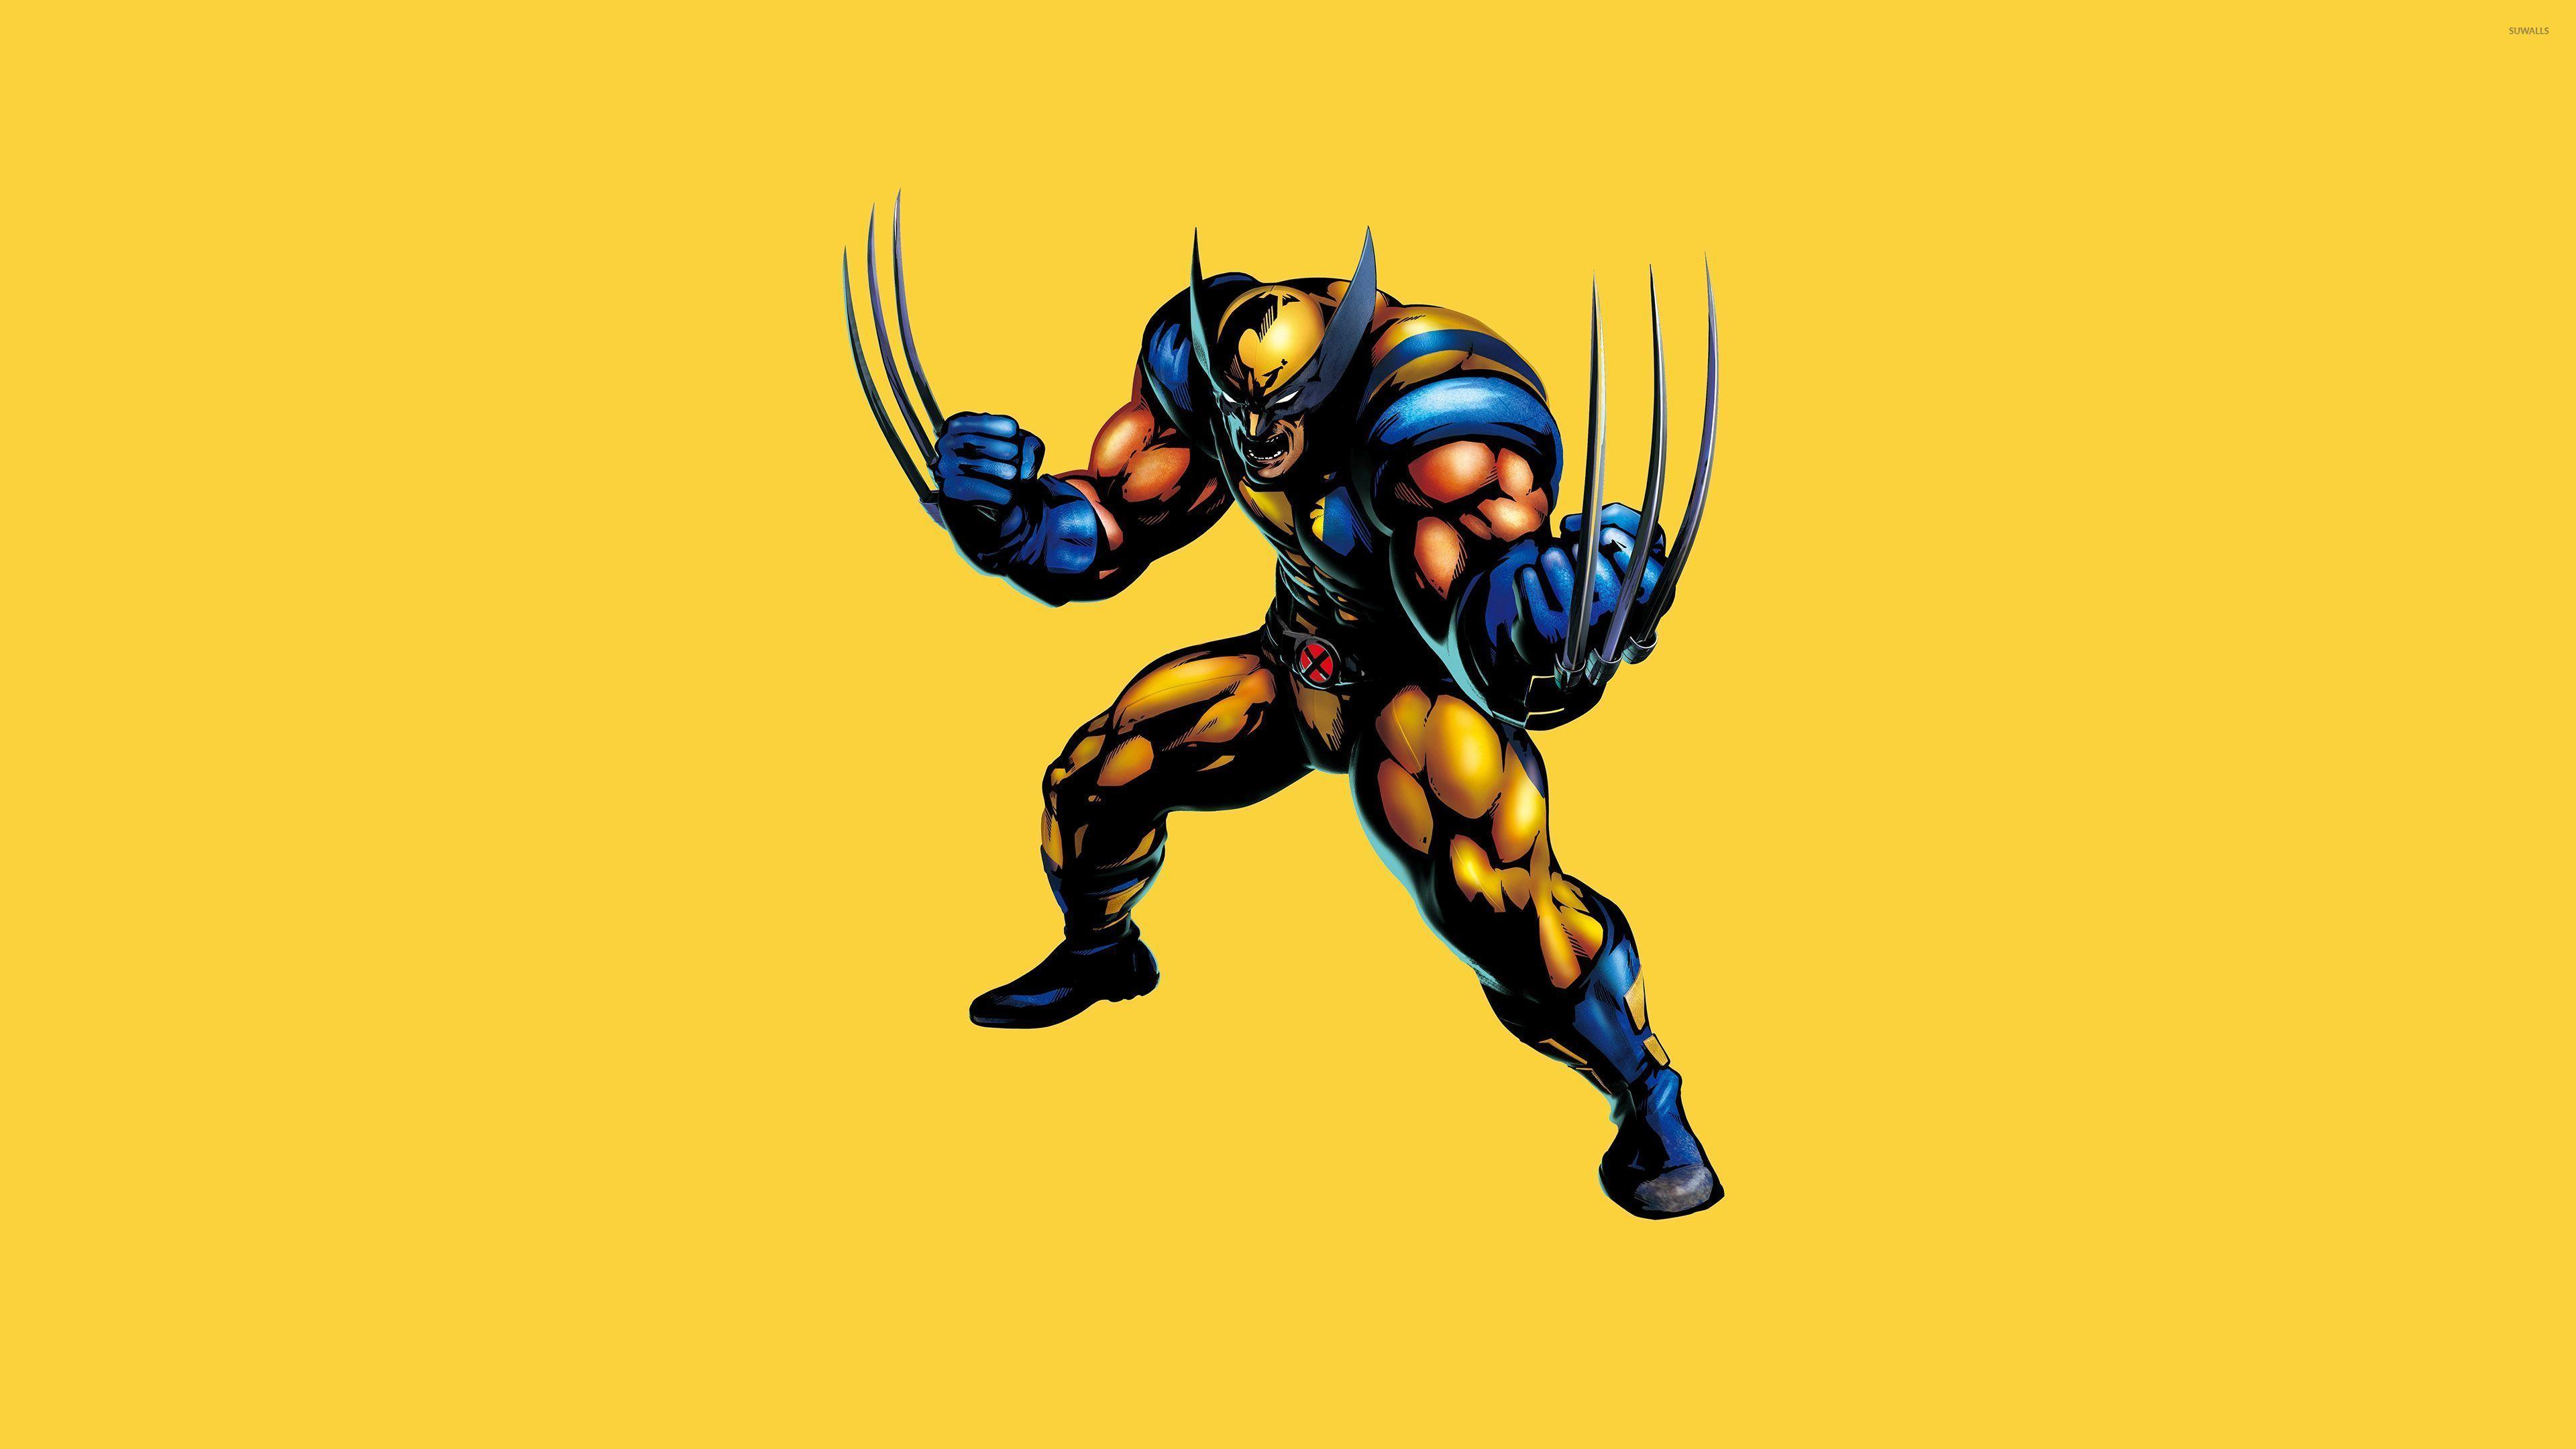 Wolverine with silver claws wallpaper wallpaper